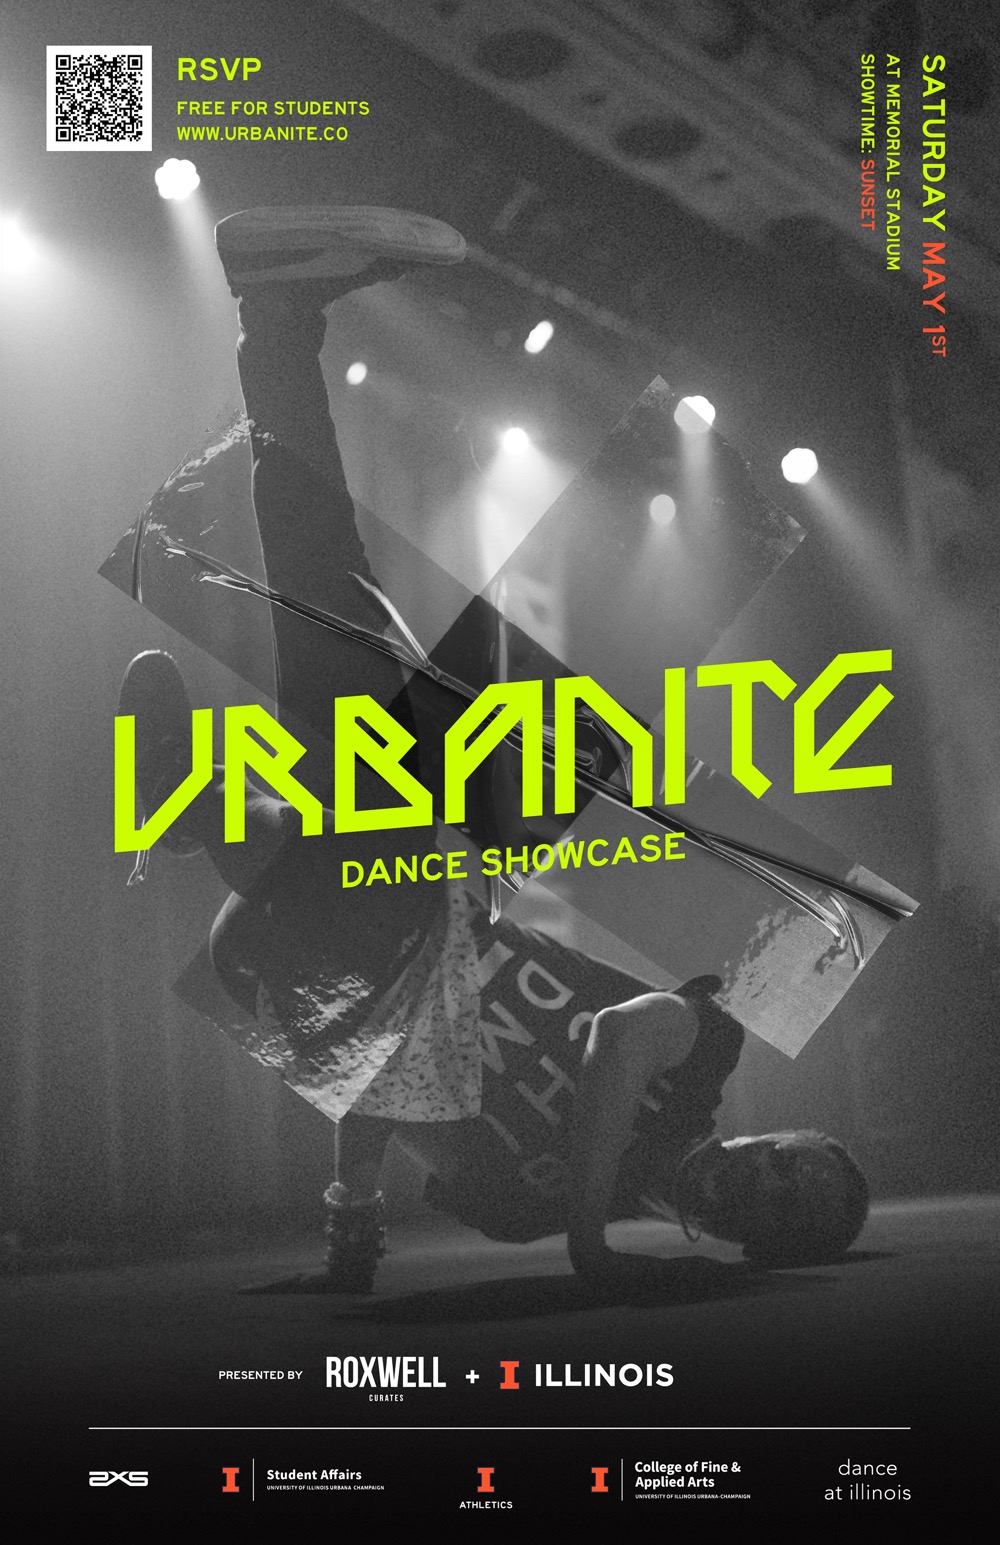 Urbanite poster featuring a person dancing on a stage, with neon yellow text overlaying it with details about the event.